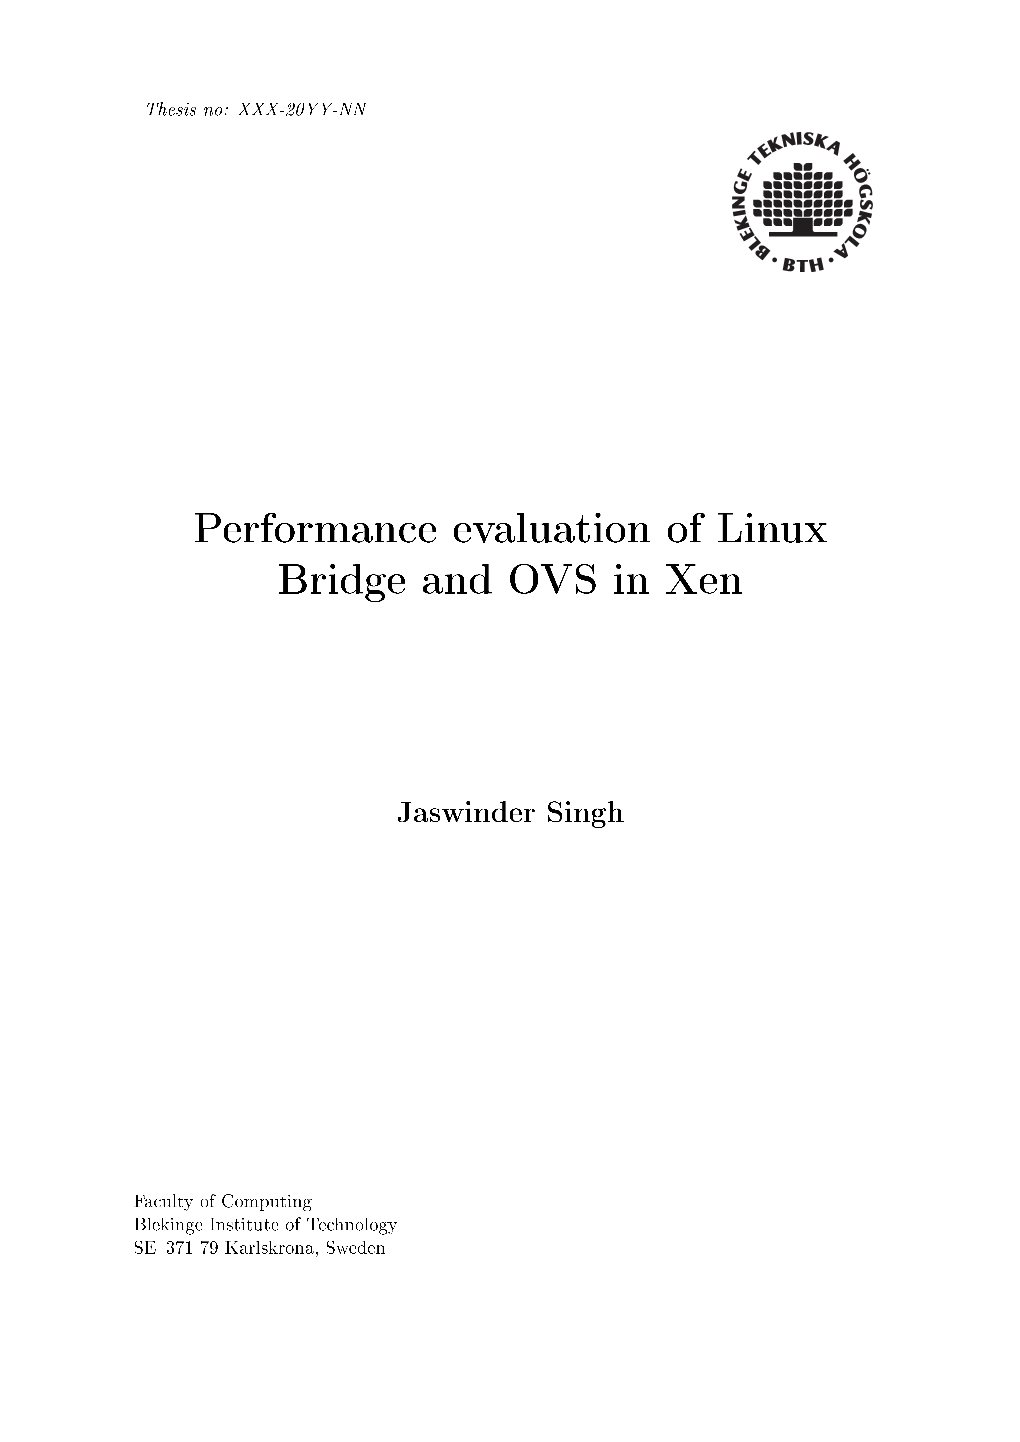 Performance Evaluation of Linux Bridge and OVS in Xen